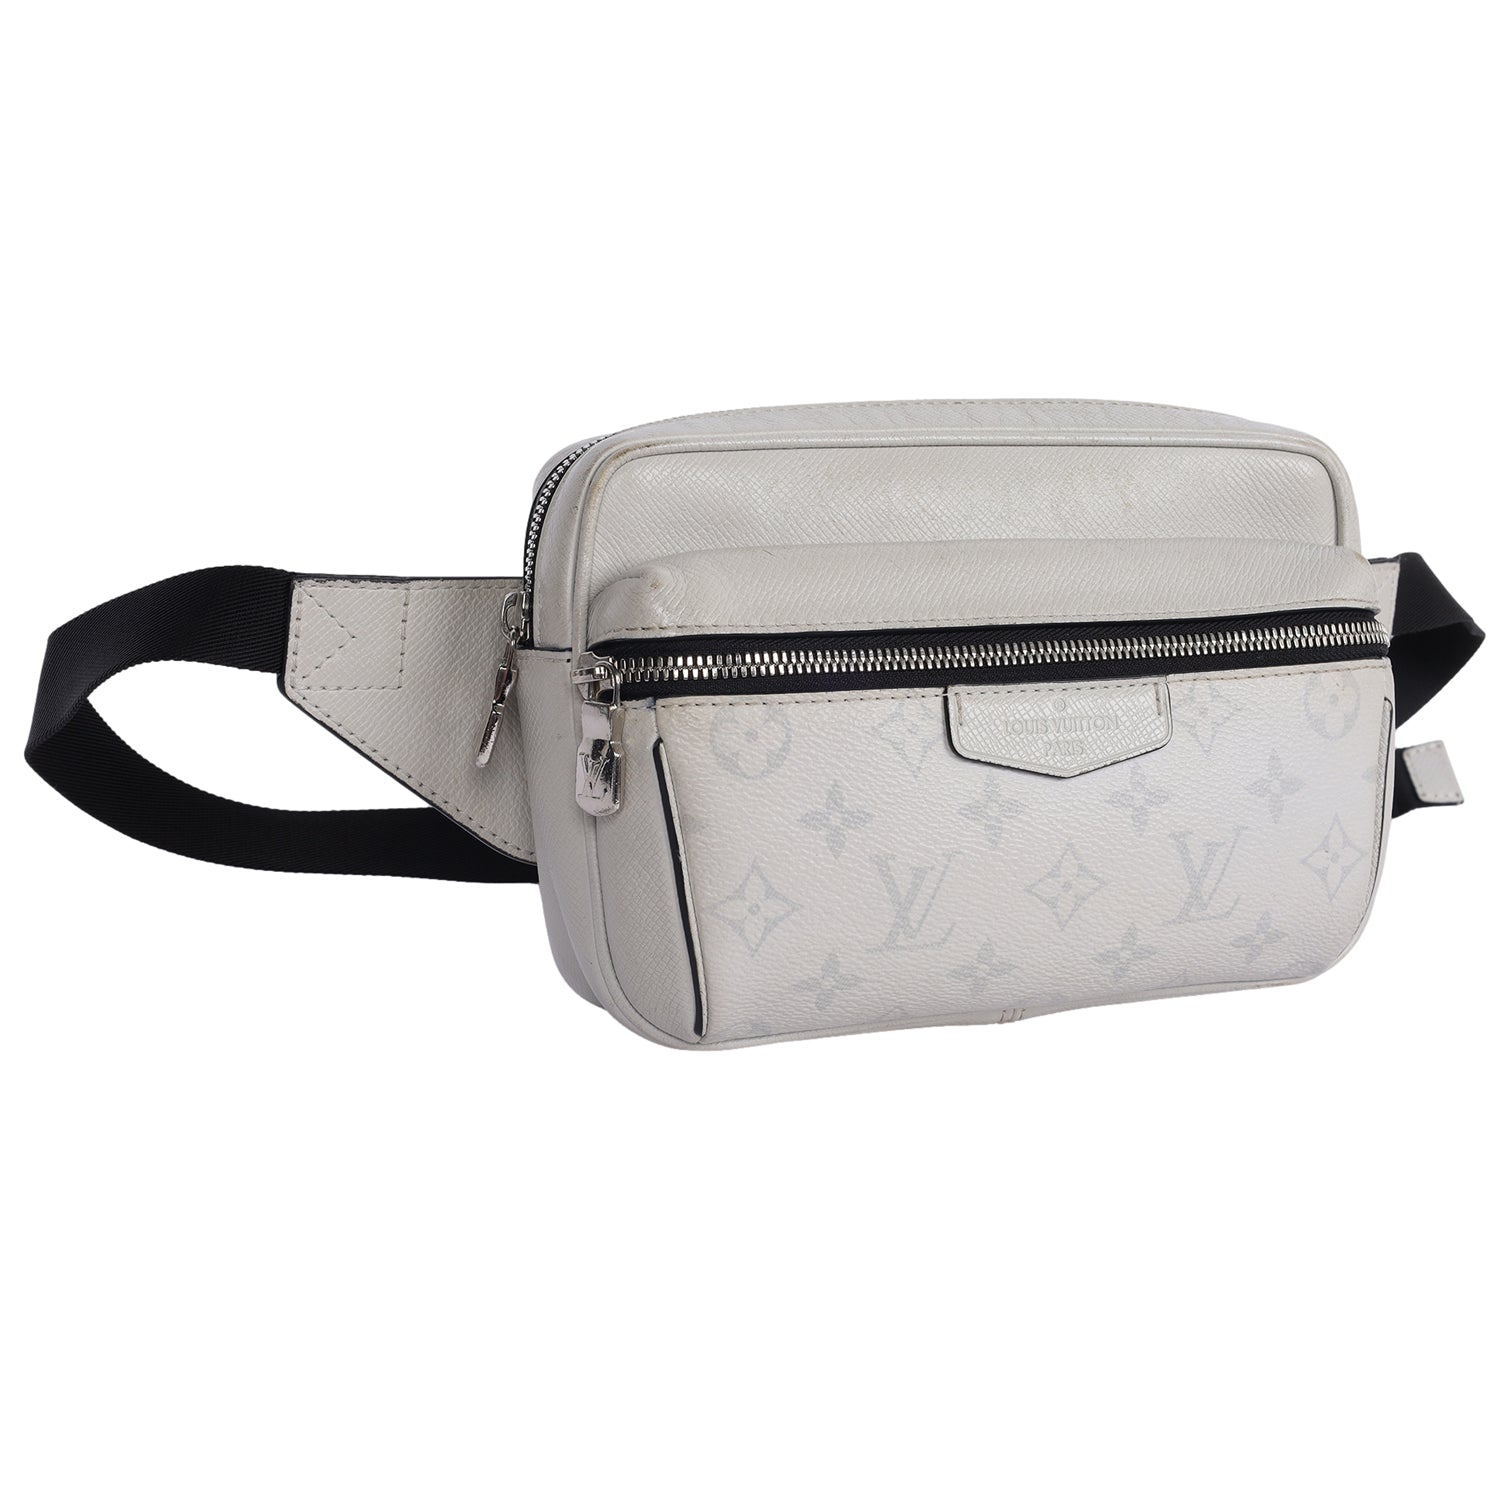 Taigarama Outdoor Messenger Antartica Bumbag Bag (Authentic Pre-Owned) –  The Lady Bag